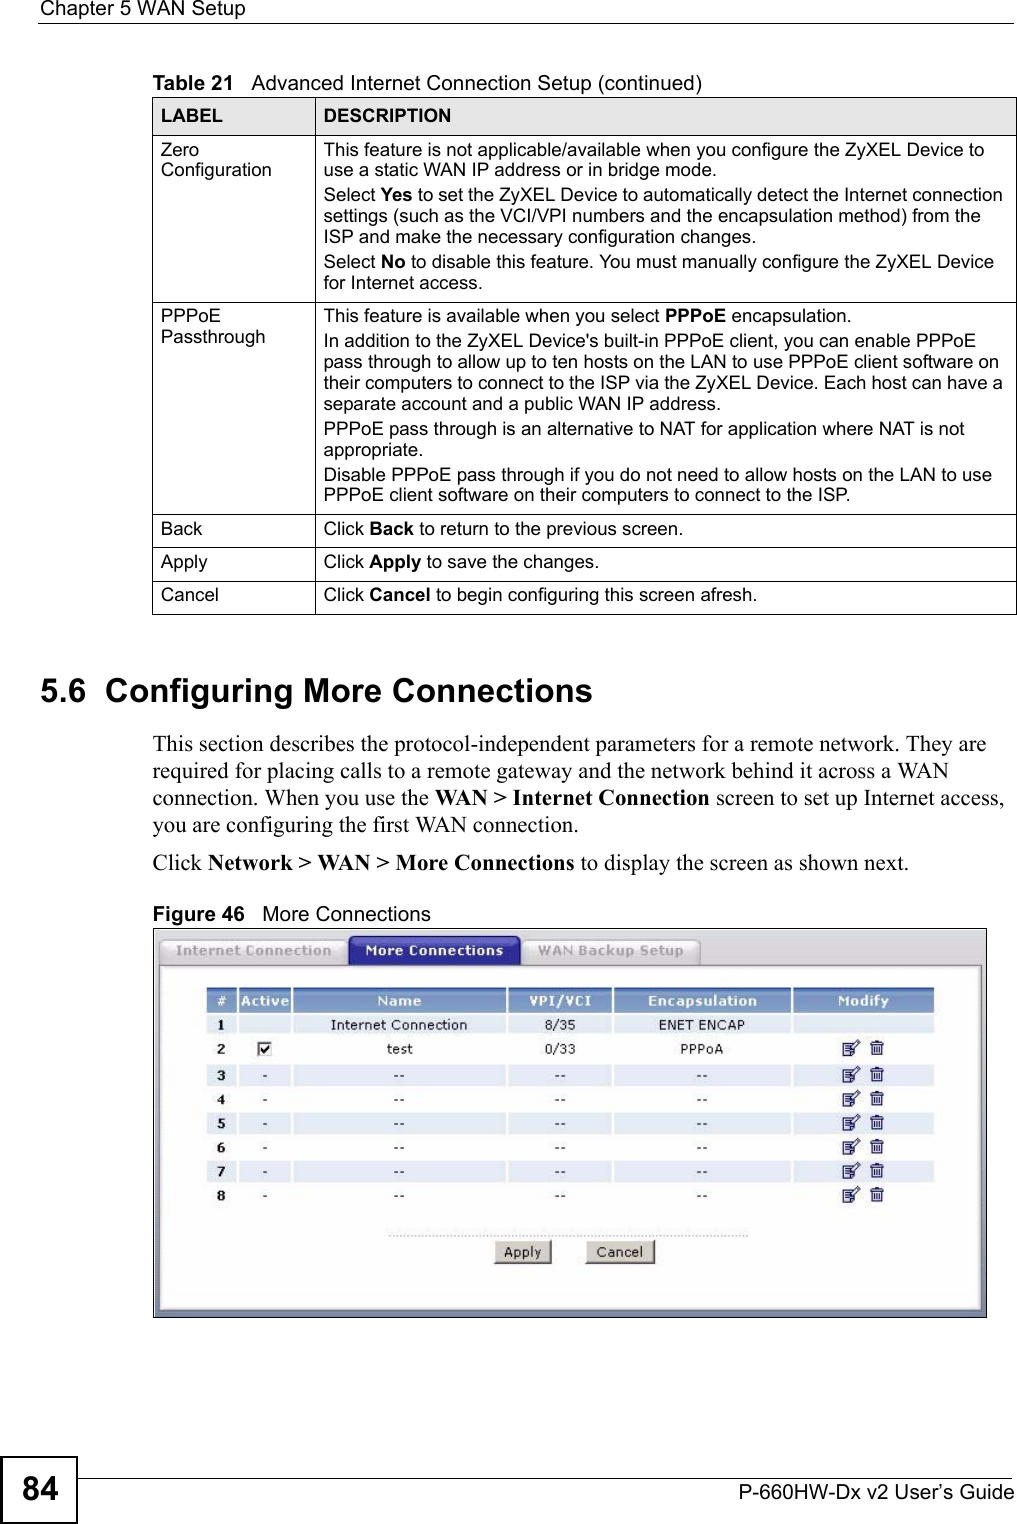 Chapter 5 WAN SetupP-660HW-Dx v2 User’s Guide845.6  Configuring More ConnectionsThis section describes the protocol-independent parameters for a remote network. They are required for placing calls to a remote gateway and the network behind it across a WAN connection. When you use the WAN &gt; Internet Connection screen to set up Internet access, you are configuring the first WAN connection.Click Network &gt; WAN &gt; More Connections to display the screen as shown next.Figure 46   More ConnectionsZero ConfigurationThis feature is not applicable/available when you configure the ZyXEL Device to use a static WAN IP address or in bridge mode. Select Yes to set the ZyXEL Device to automatically detect the Internet connection settings (such as the VCI/VPI numbers and the encapsulation method) from the ISP and make the necessary configuration changes.Select No to disable this feature. You must manually configure the ZyXEL Device for Internet access. PPPoE PassthroughThis feature is available when you select PPPoE encapsulation. In addition to the ZyXEL Device&apos;s built-in PPPoE client, you can enable PPPoE pass through to allow up to ten hosts on the LAN to use PPPoE client software on their computers to connect to the ISP via the ZyXEL Device. Each host can have a separate account and a public WAN IP address. PPPoE pass through is an alternative to NAT for application where NAT is not appropriate.Disable PPPoE pass through if you do not need to allow hosts on the LAN to use PPPoE client software on their computers to connect to the ISP.Back Click Back to return to the previous screen.Apply Click Apply to save the changes. Cancel Click Cancel to begin configuring this screen afresh.Table 21   Advanced Internet Connection Setup (continued)LABEL DESCRIPTION